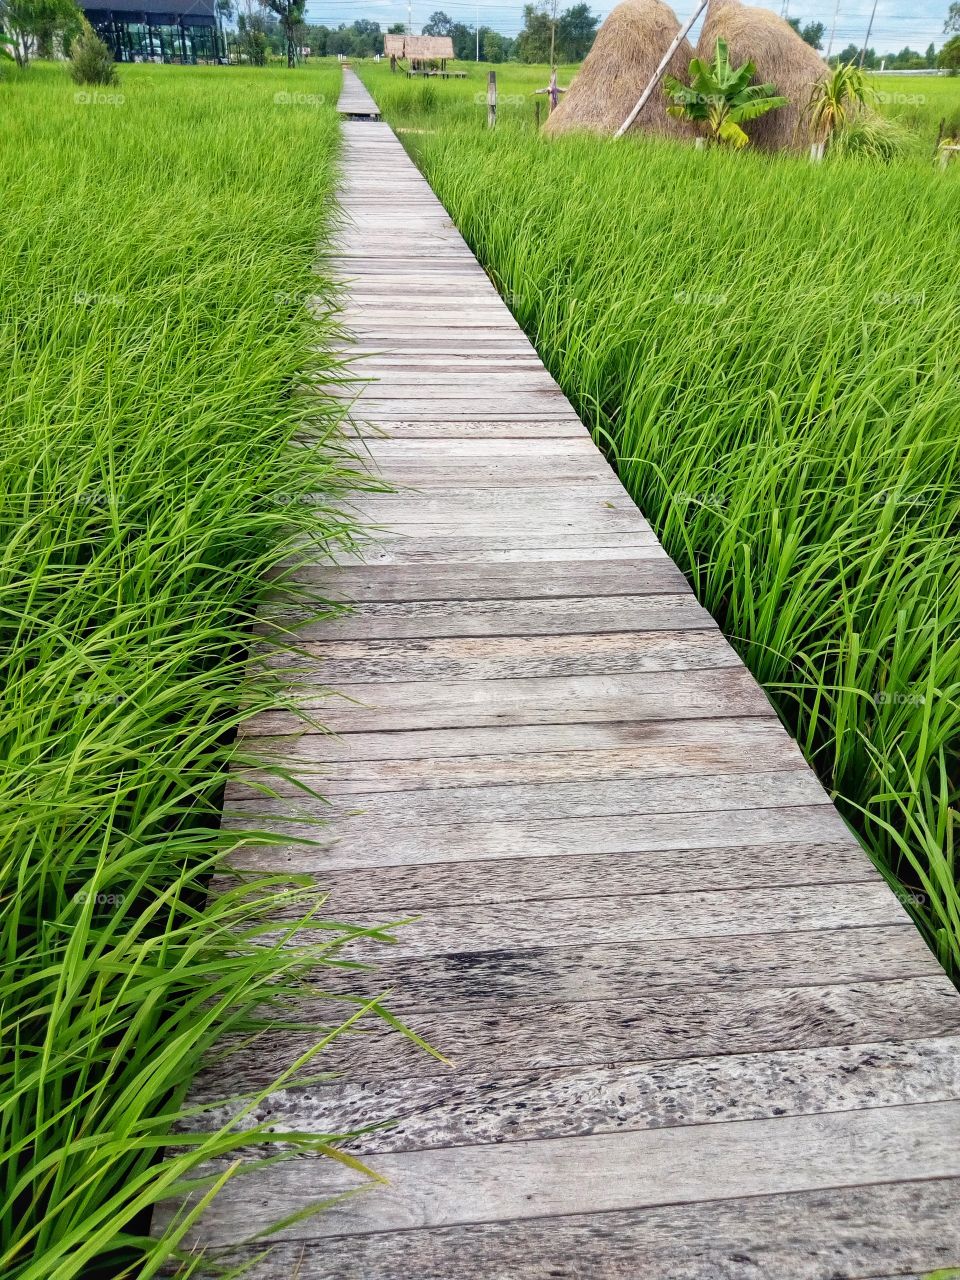 Green rice fields and old wooden bridges.